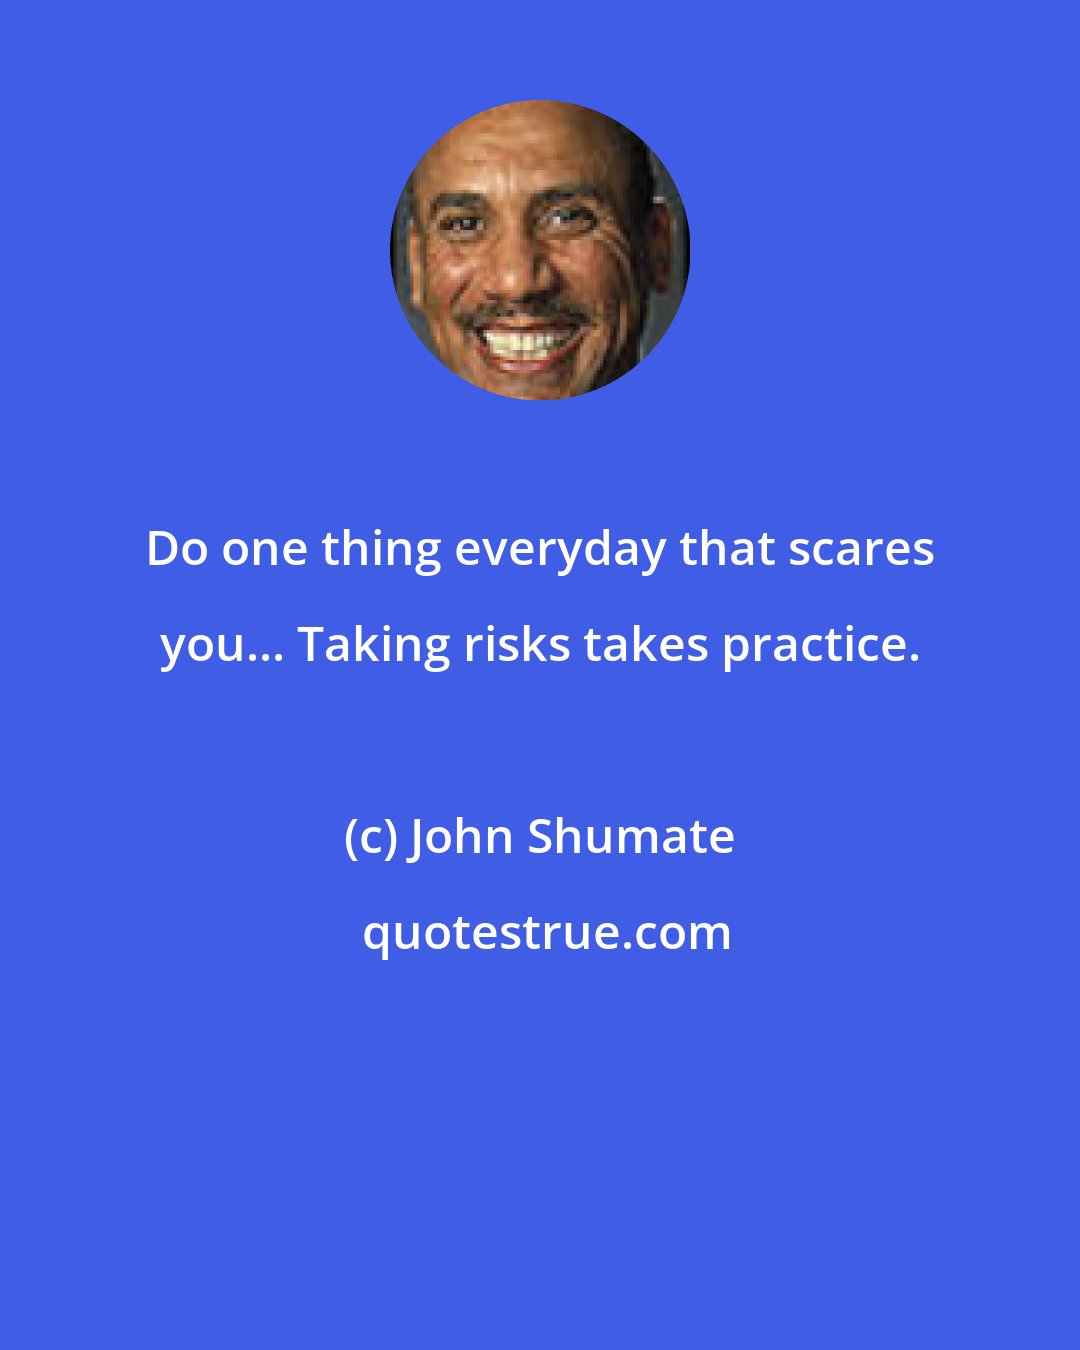 John Shumate: Do one thing everyday that scares you... Taking risks takes practice.